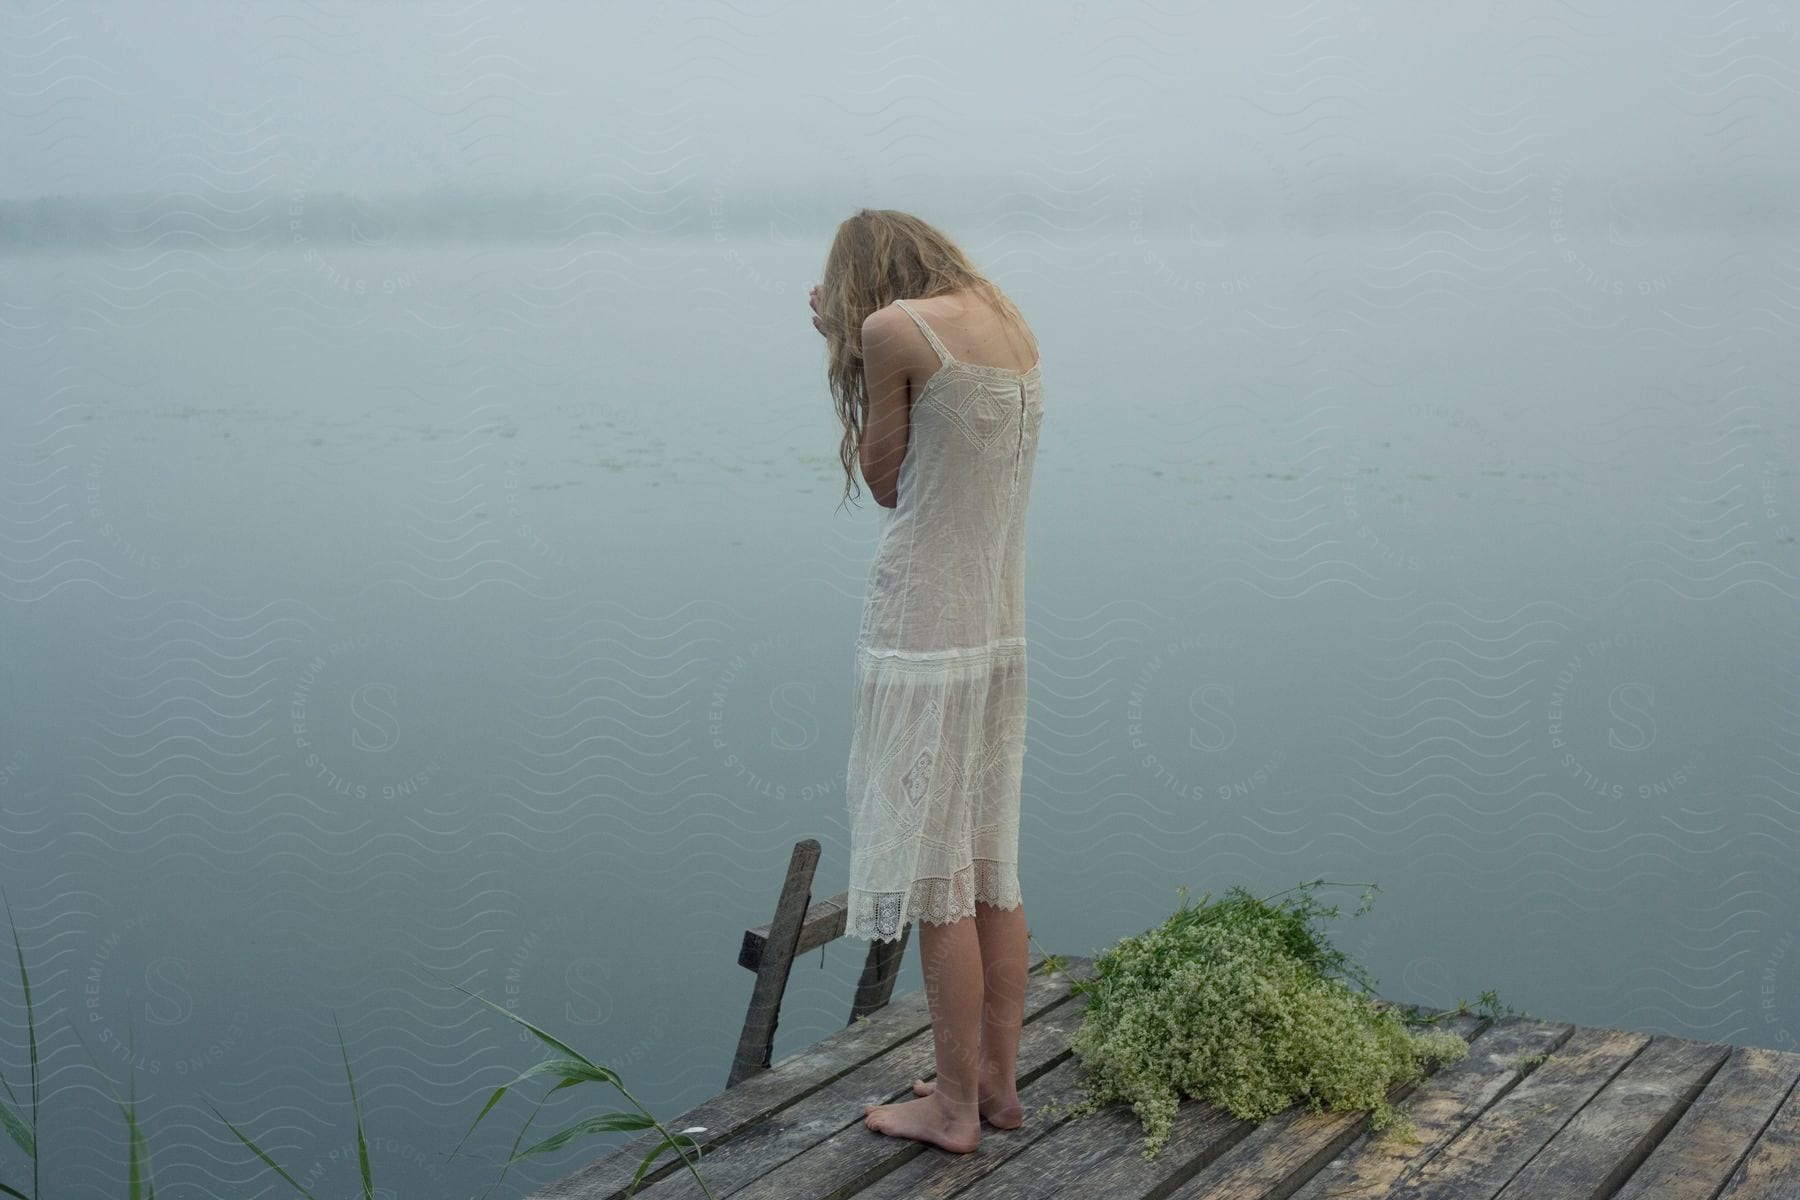 A blonde girl standing on the end of a wooden pier wearing a sheer shift dress and looking down